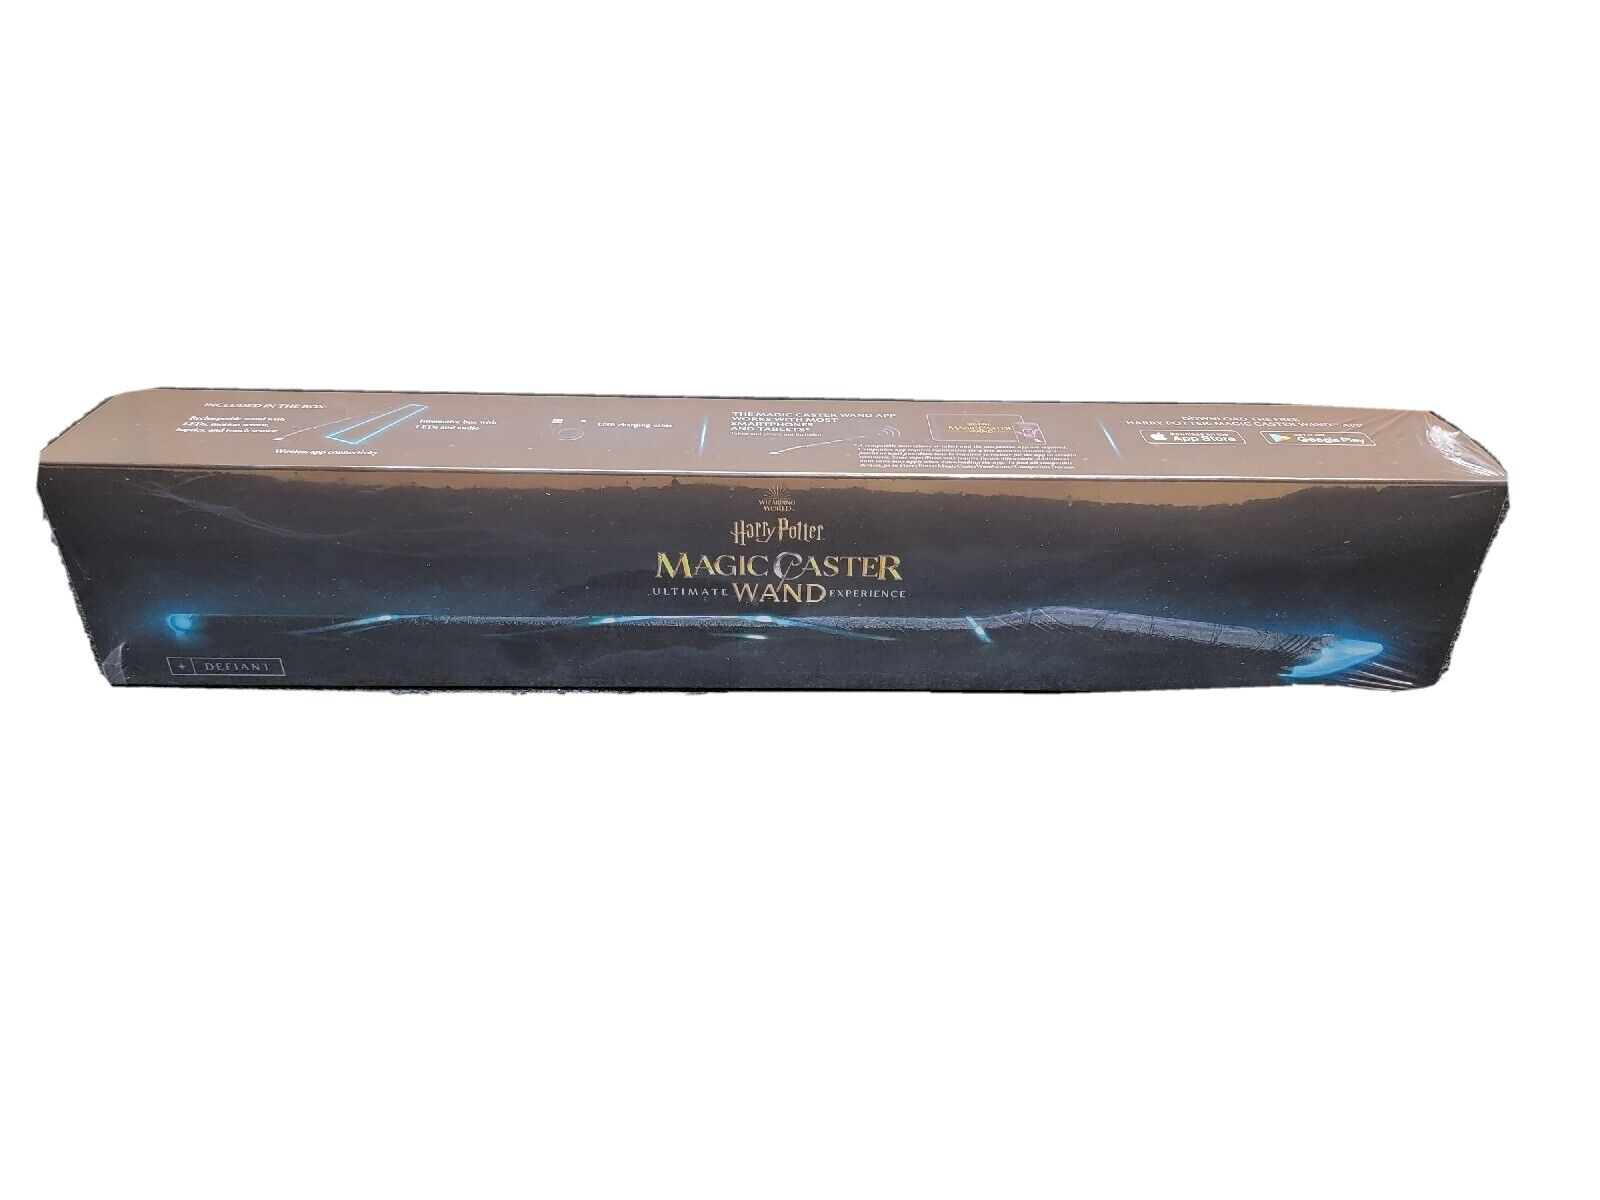 NEW SEALED RARE Harry Potter Magic Caster Wand Unopened - Defiant Hard to Find